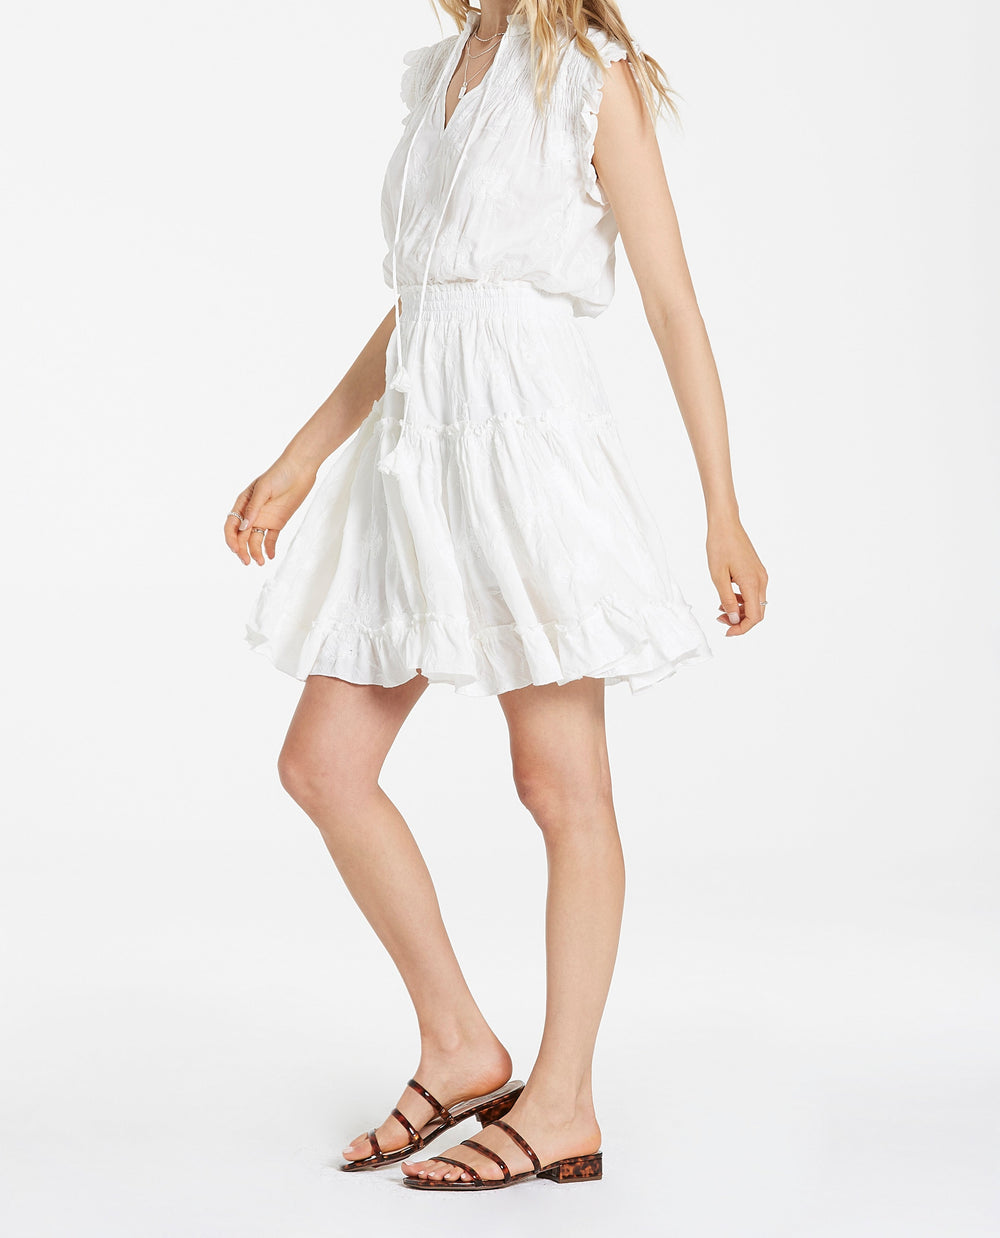 image of a female model wearing a MELODIE TIERED RUFFLE DRESS PEARLED IVORY FLORAL DRESSES